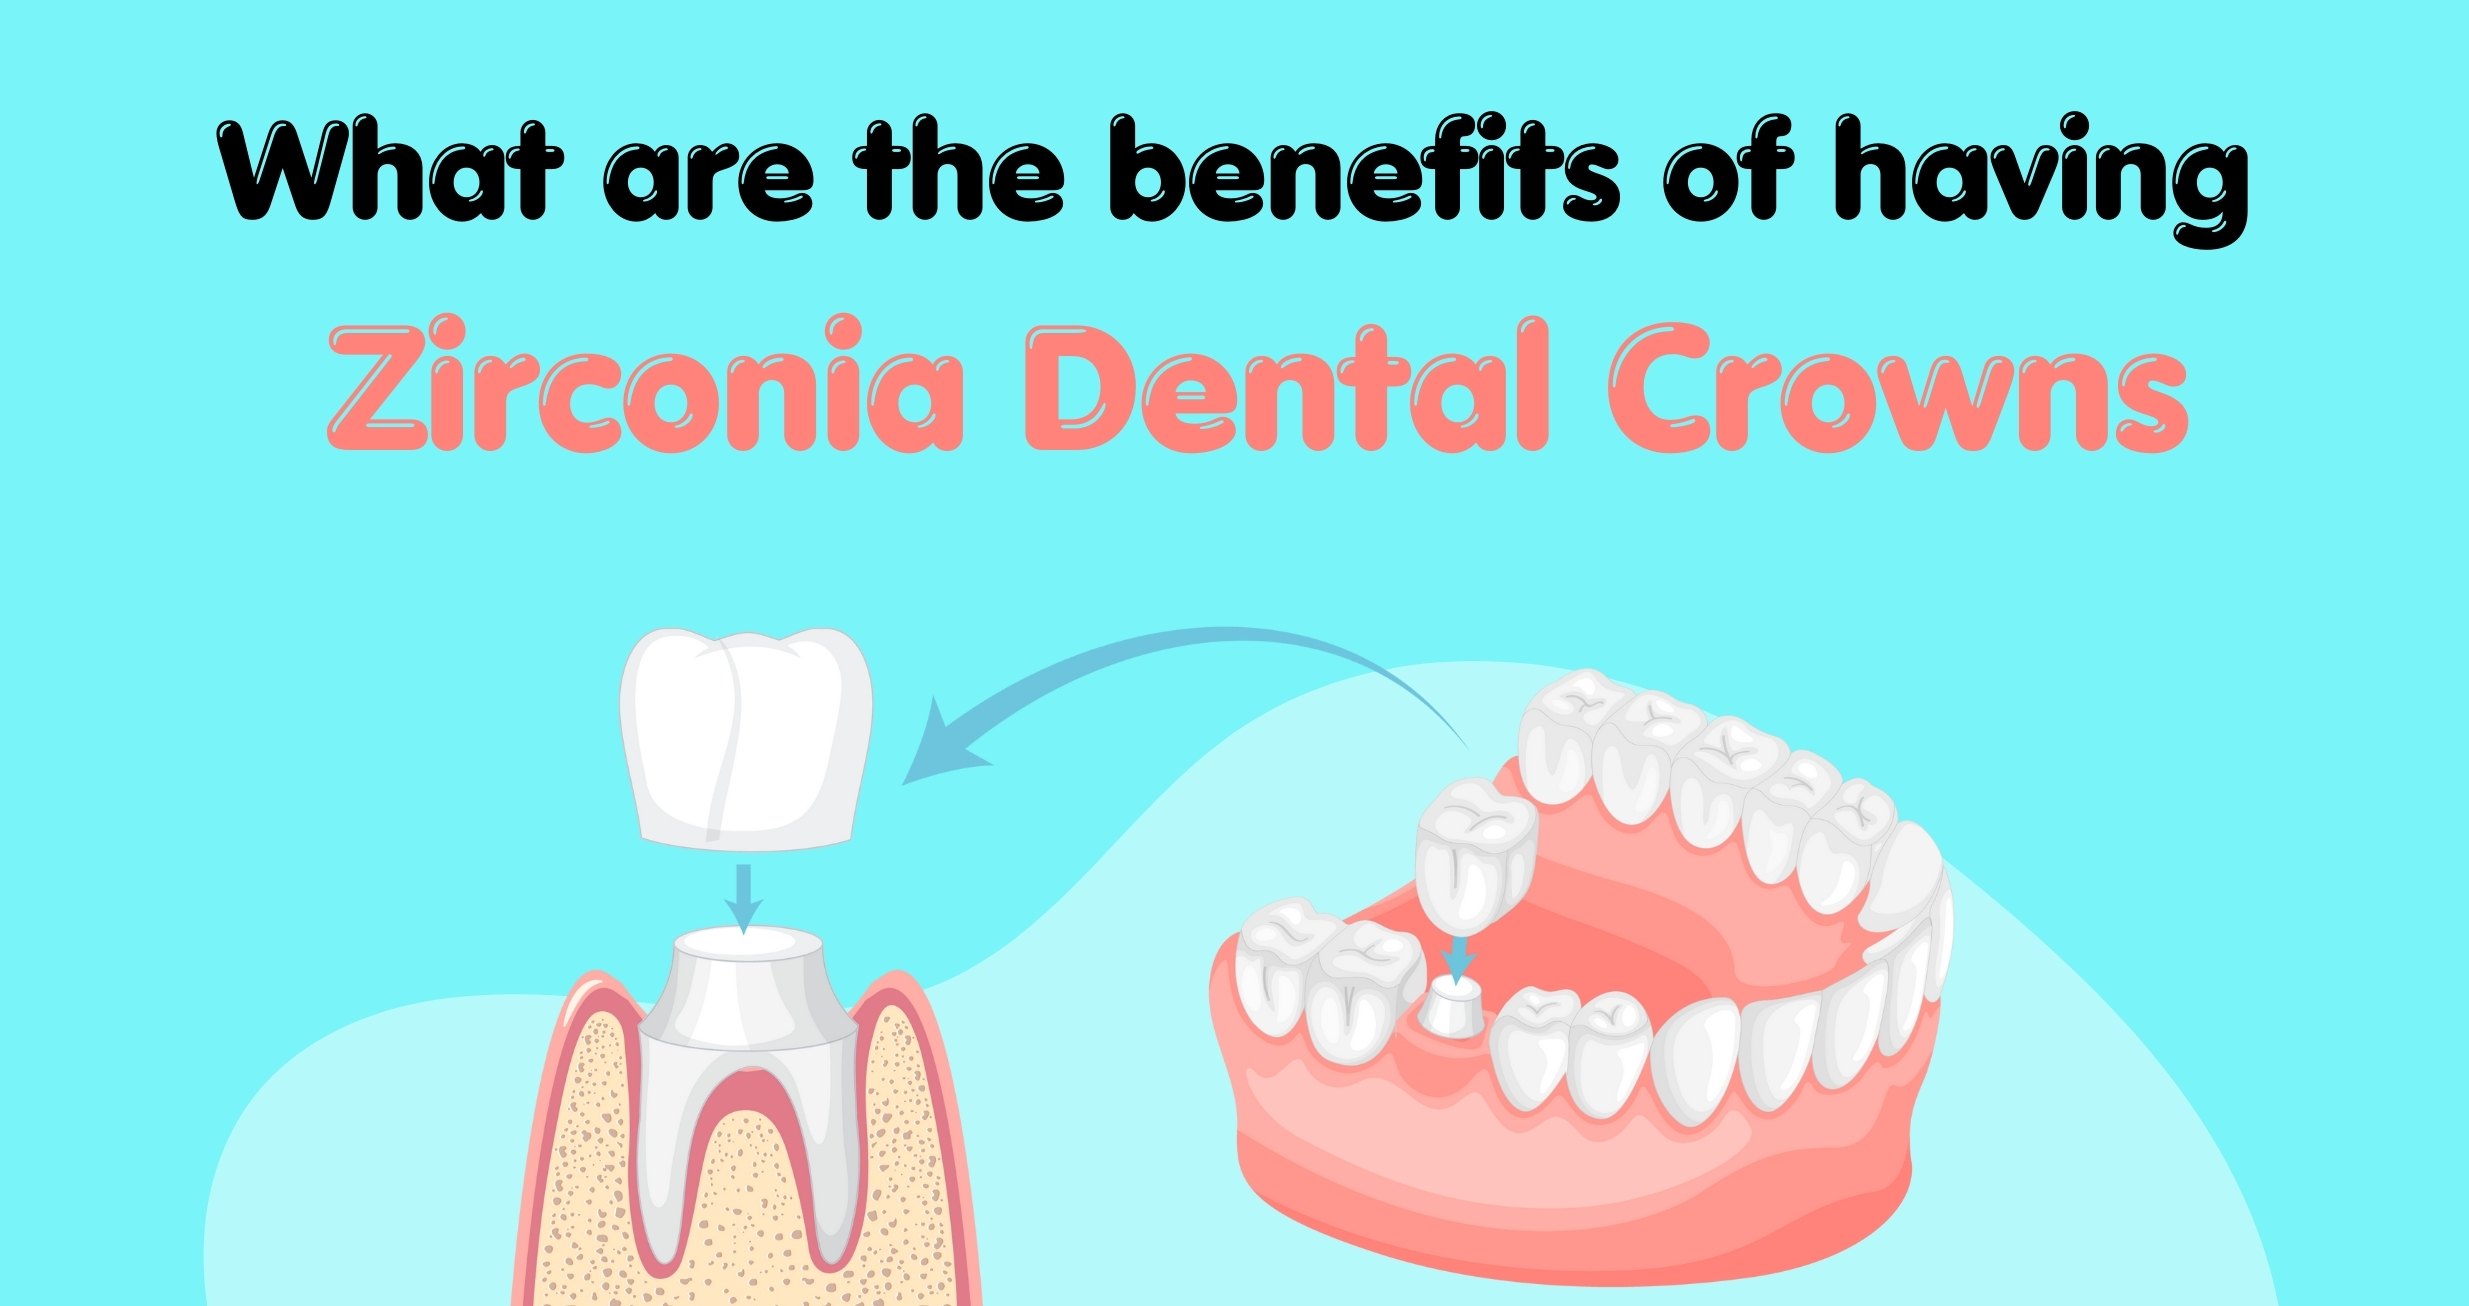 What Are The Benefits Of Having Zirconia Dental Crowns?